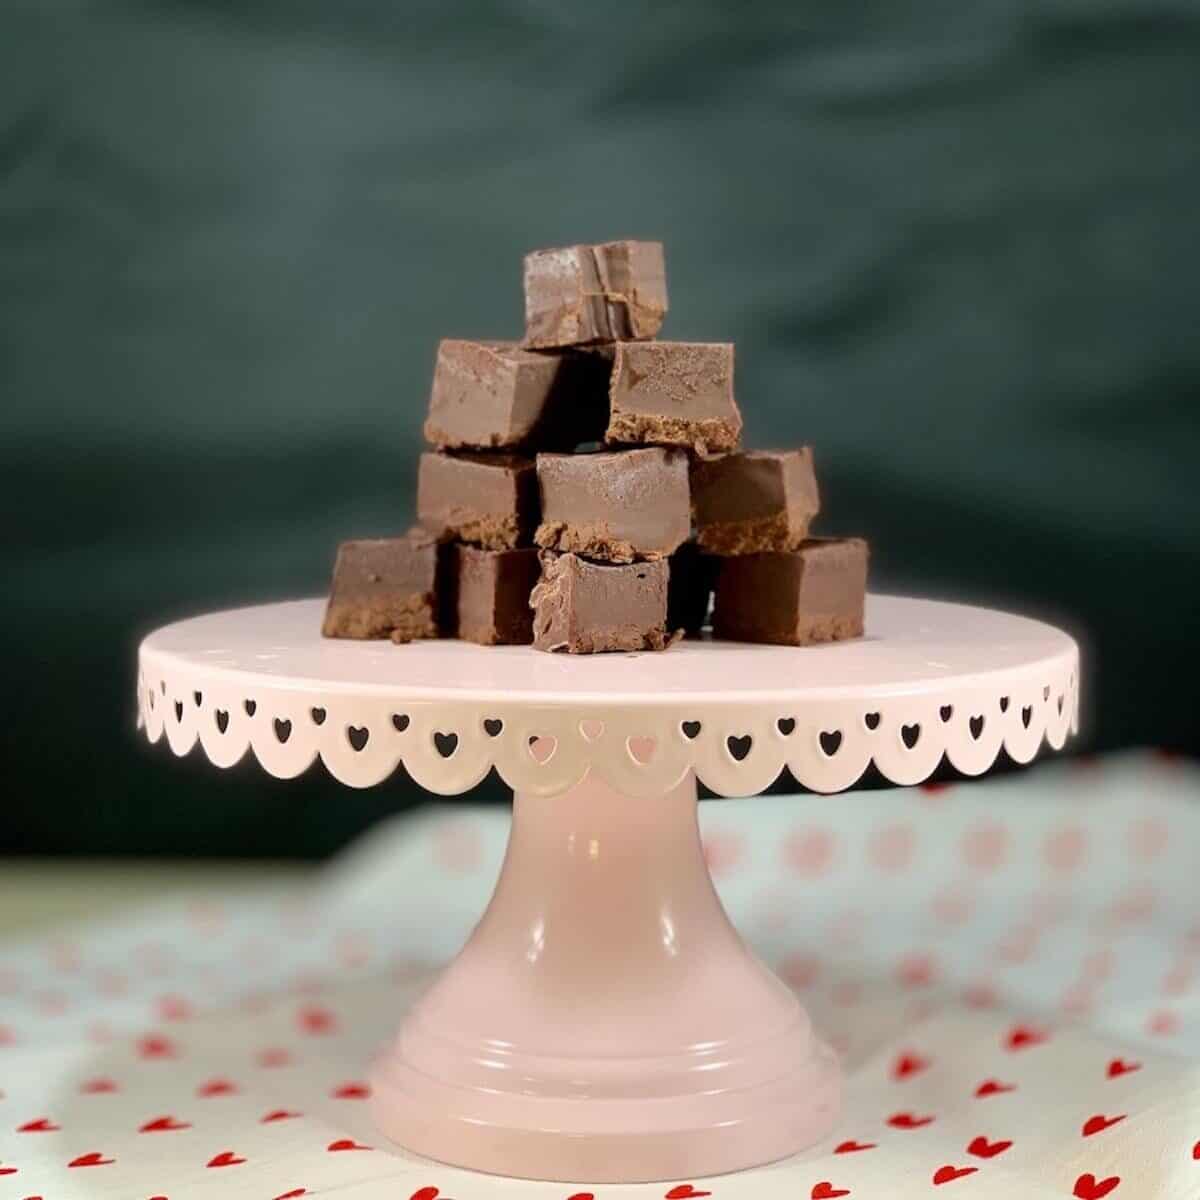 Kahlua Fudge stacked on a pink cake stand.